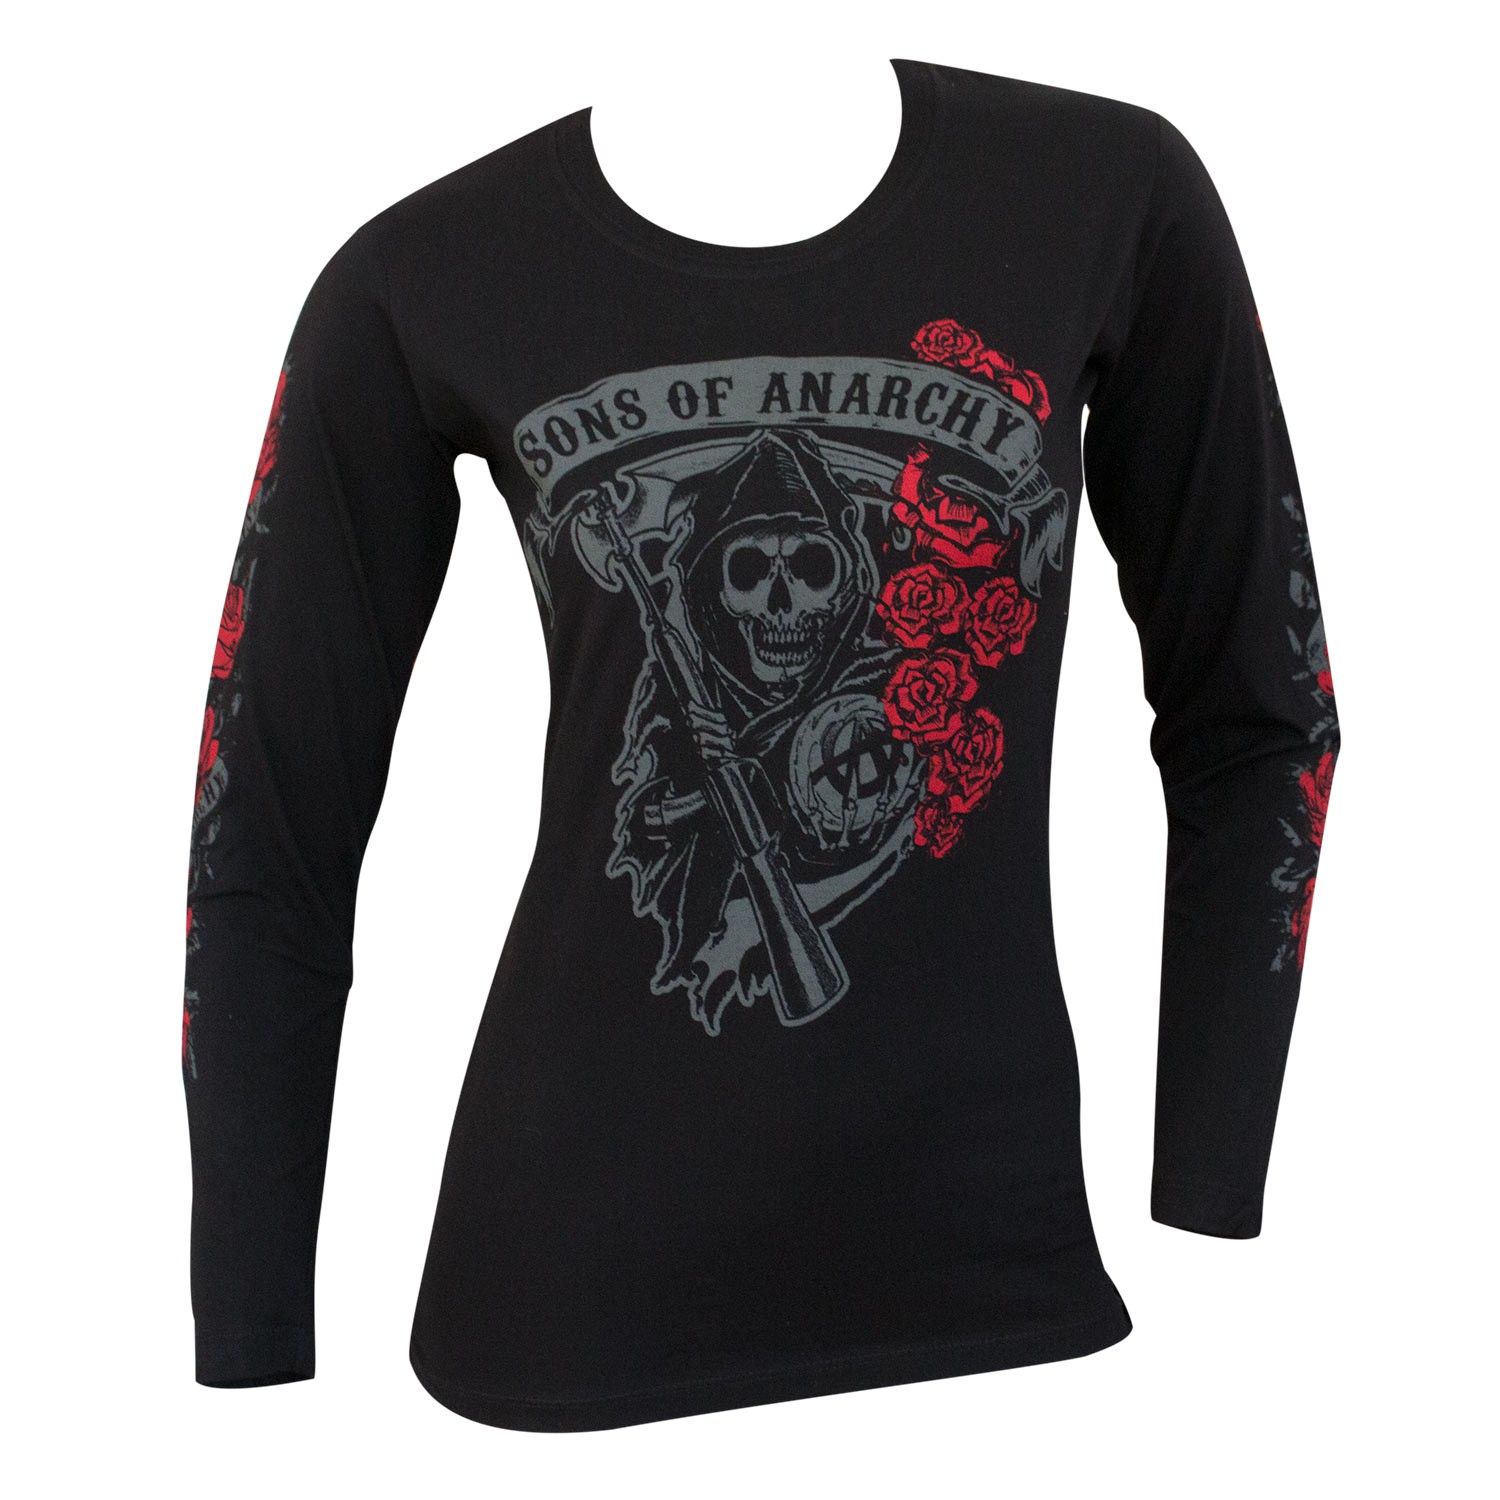 SONS OF ANARCHY REAPER CREW  T-Shirt  camiseta cotton officially licensed